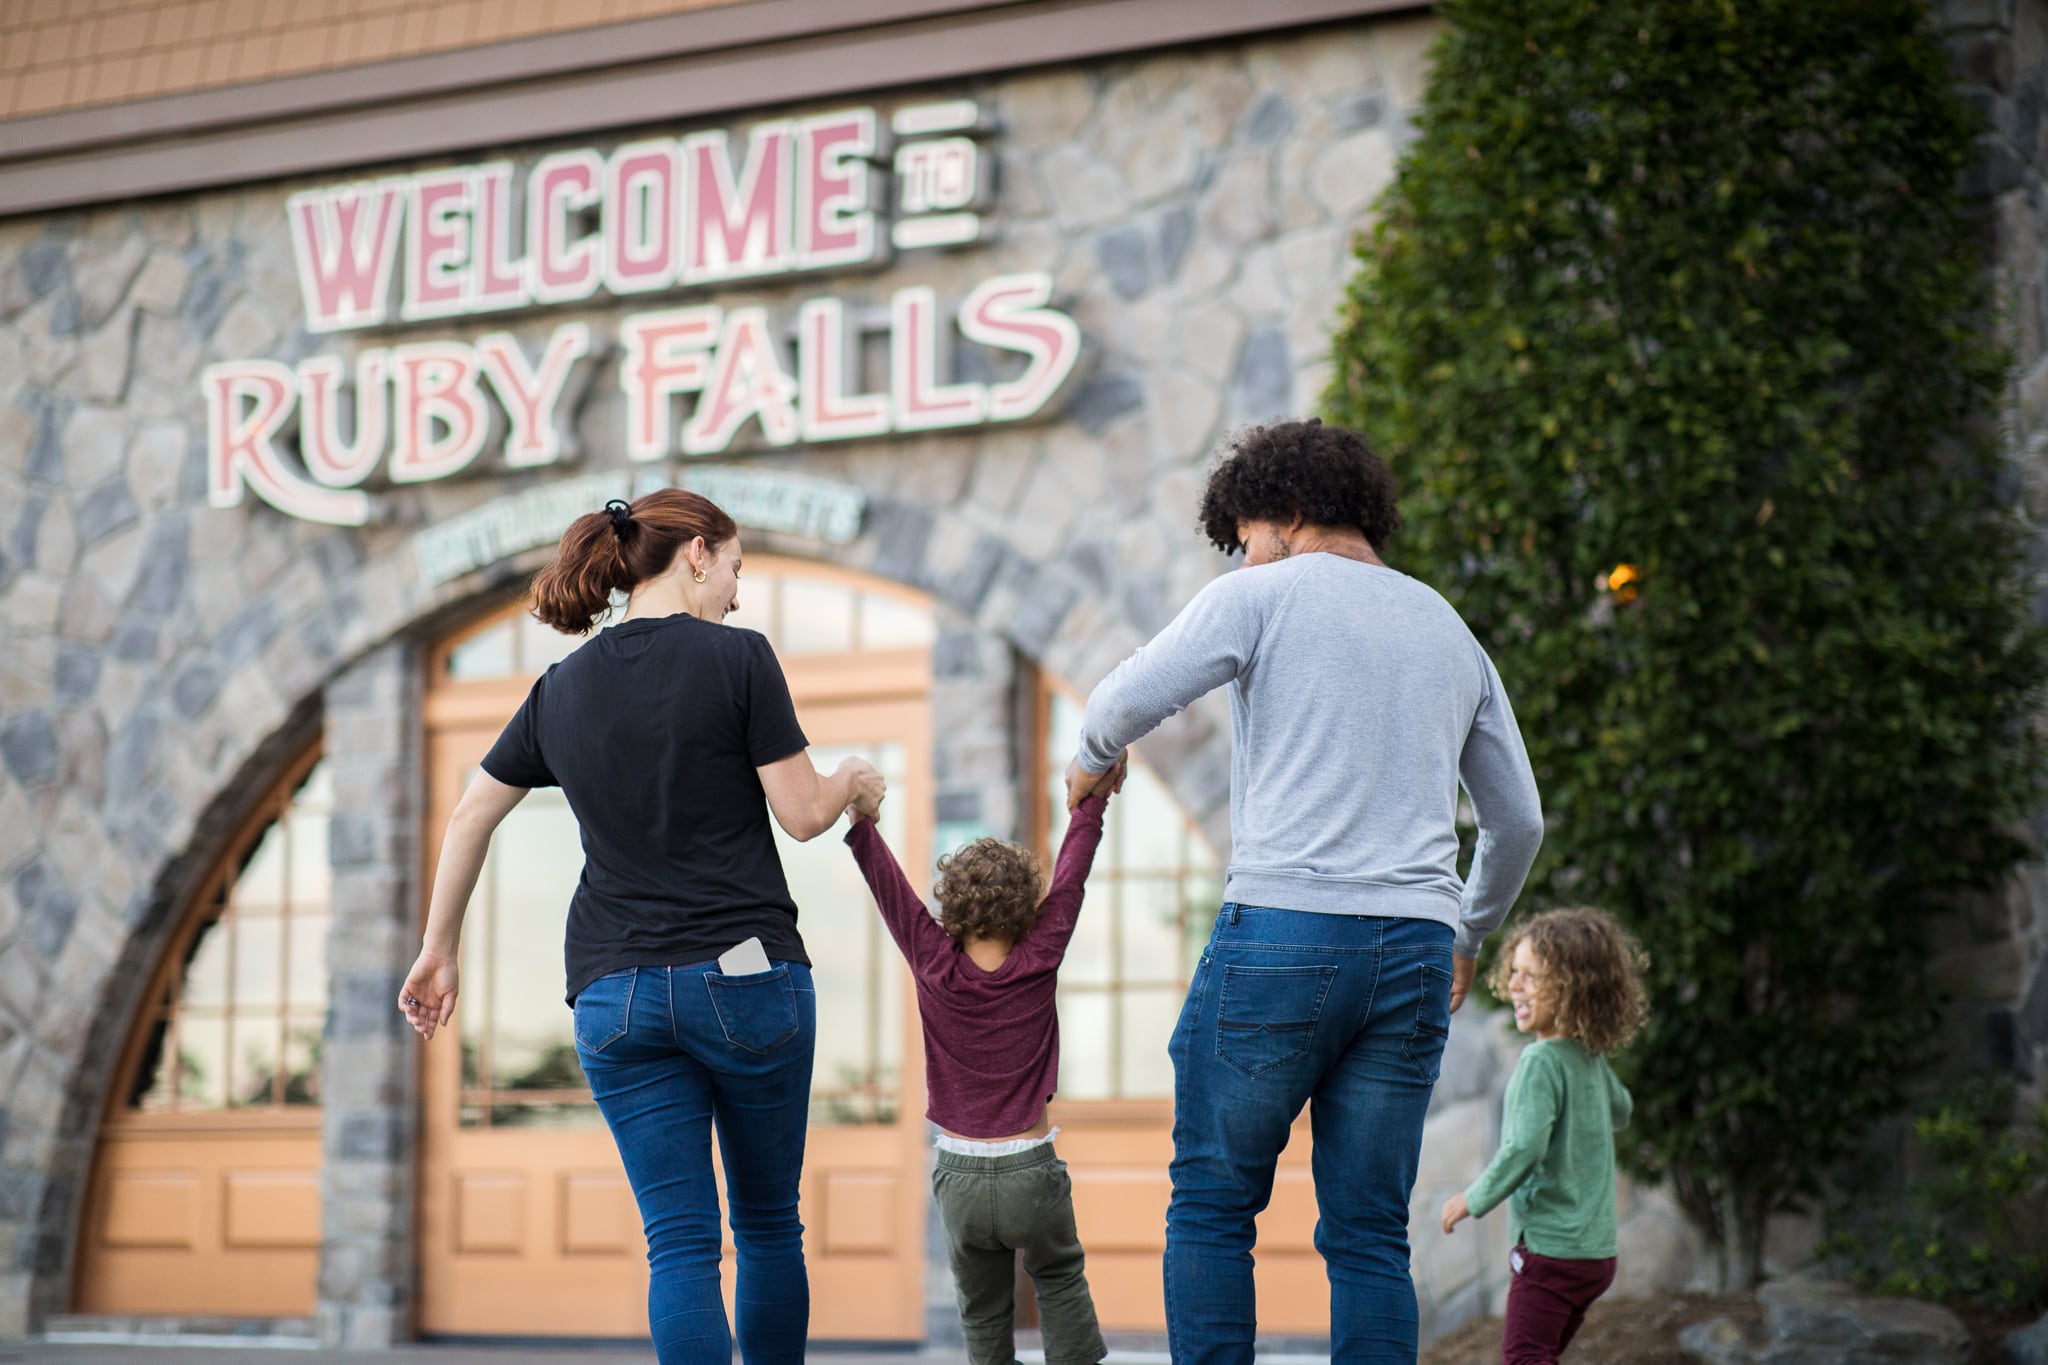 A man, woman and two kids enter the Ruby Falls welcome center